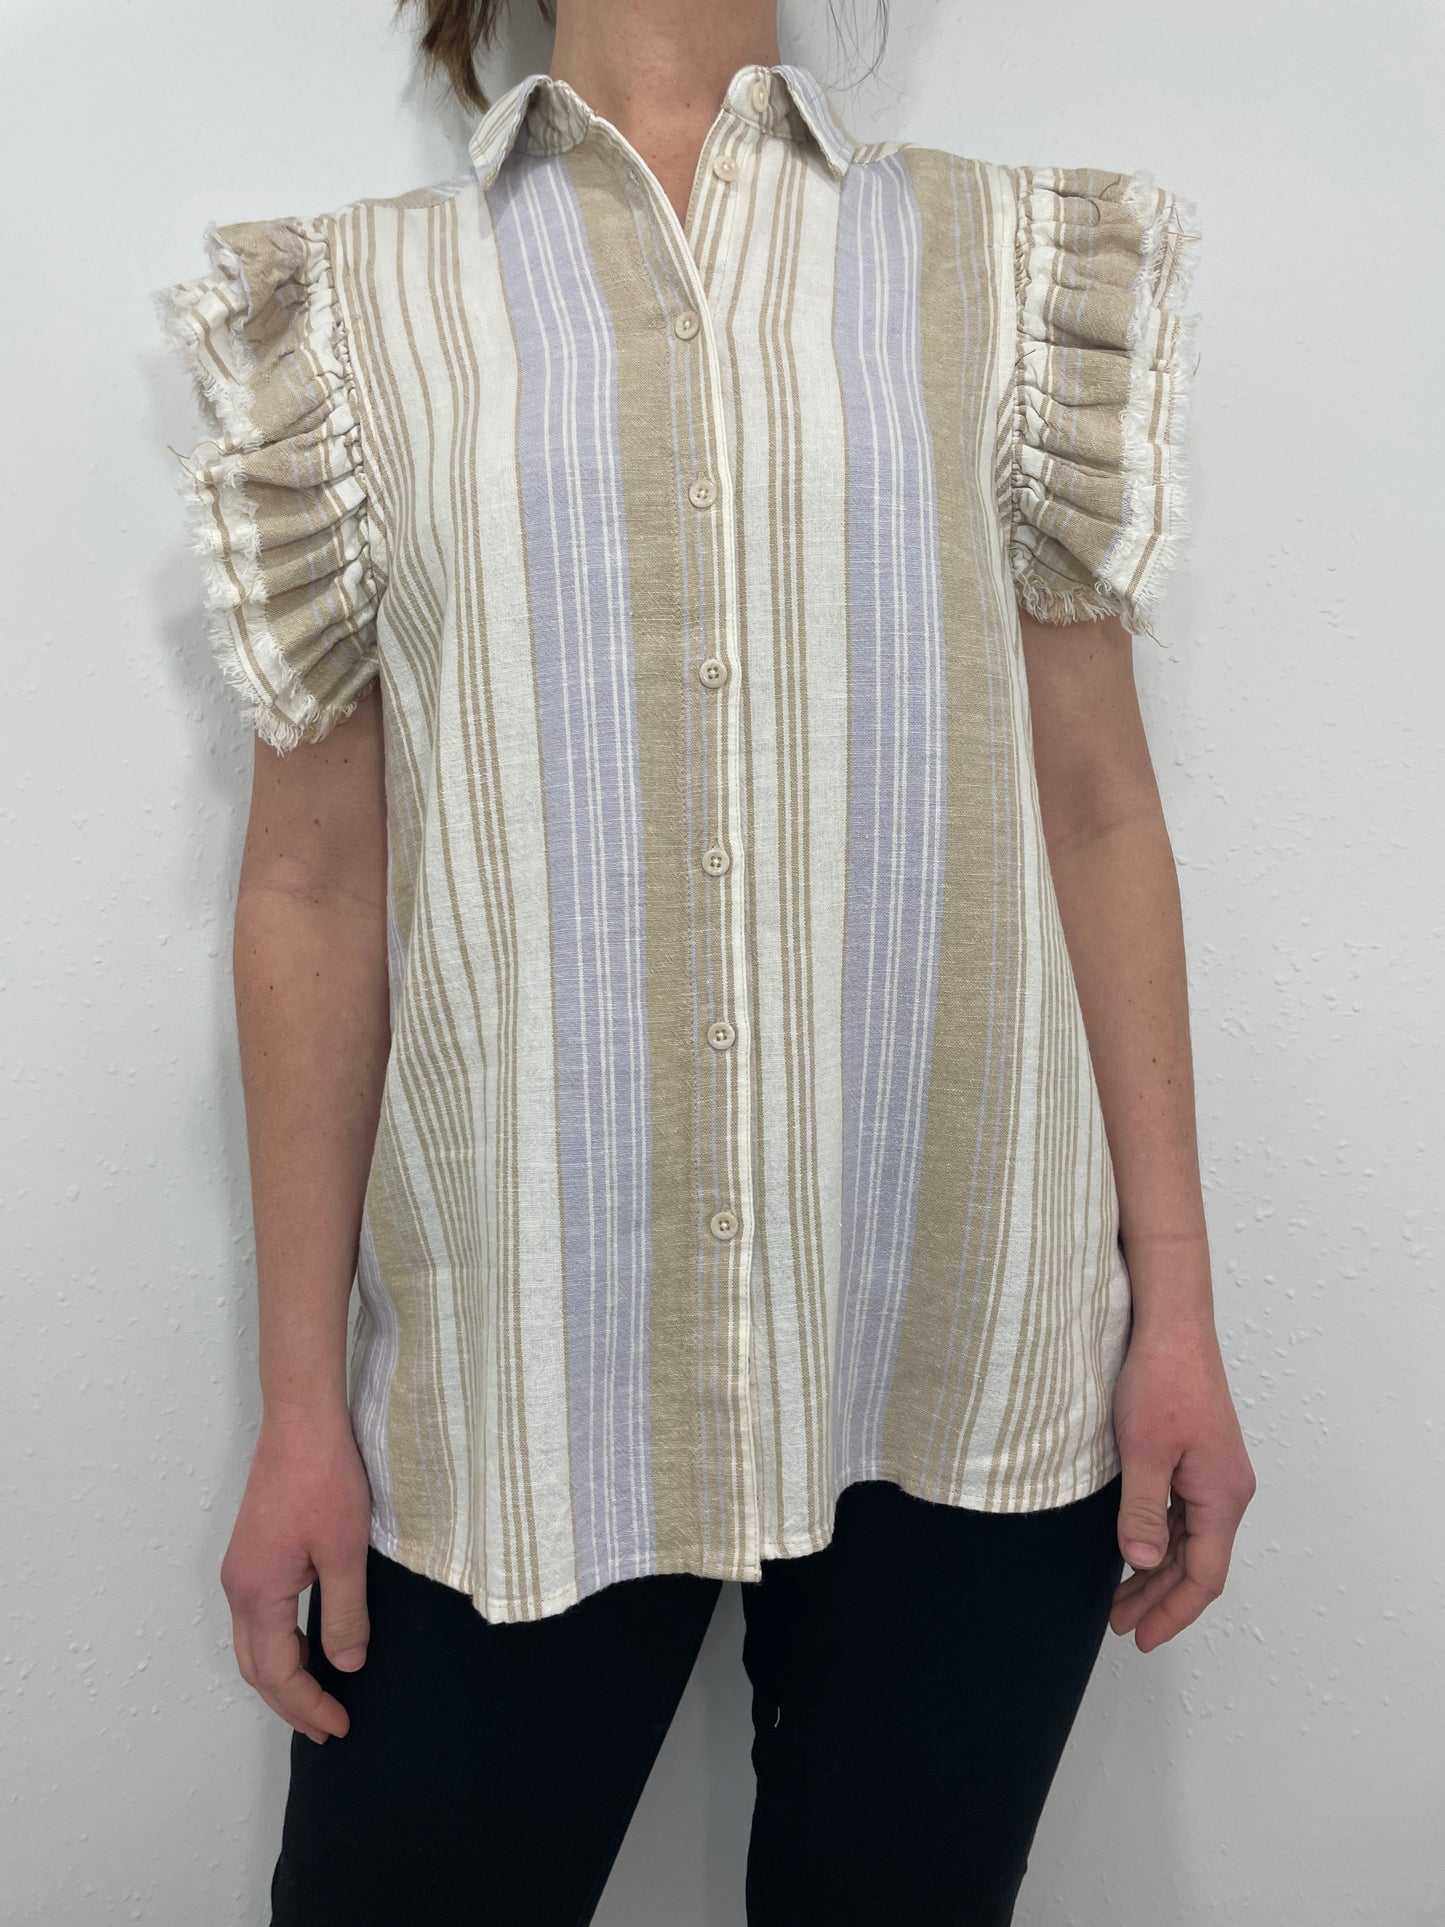 STATEMENT SLEEVE BUTTON FRONT TOP - SAND/BLUE